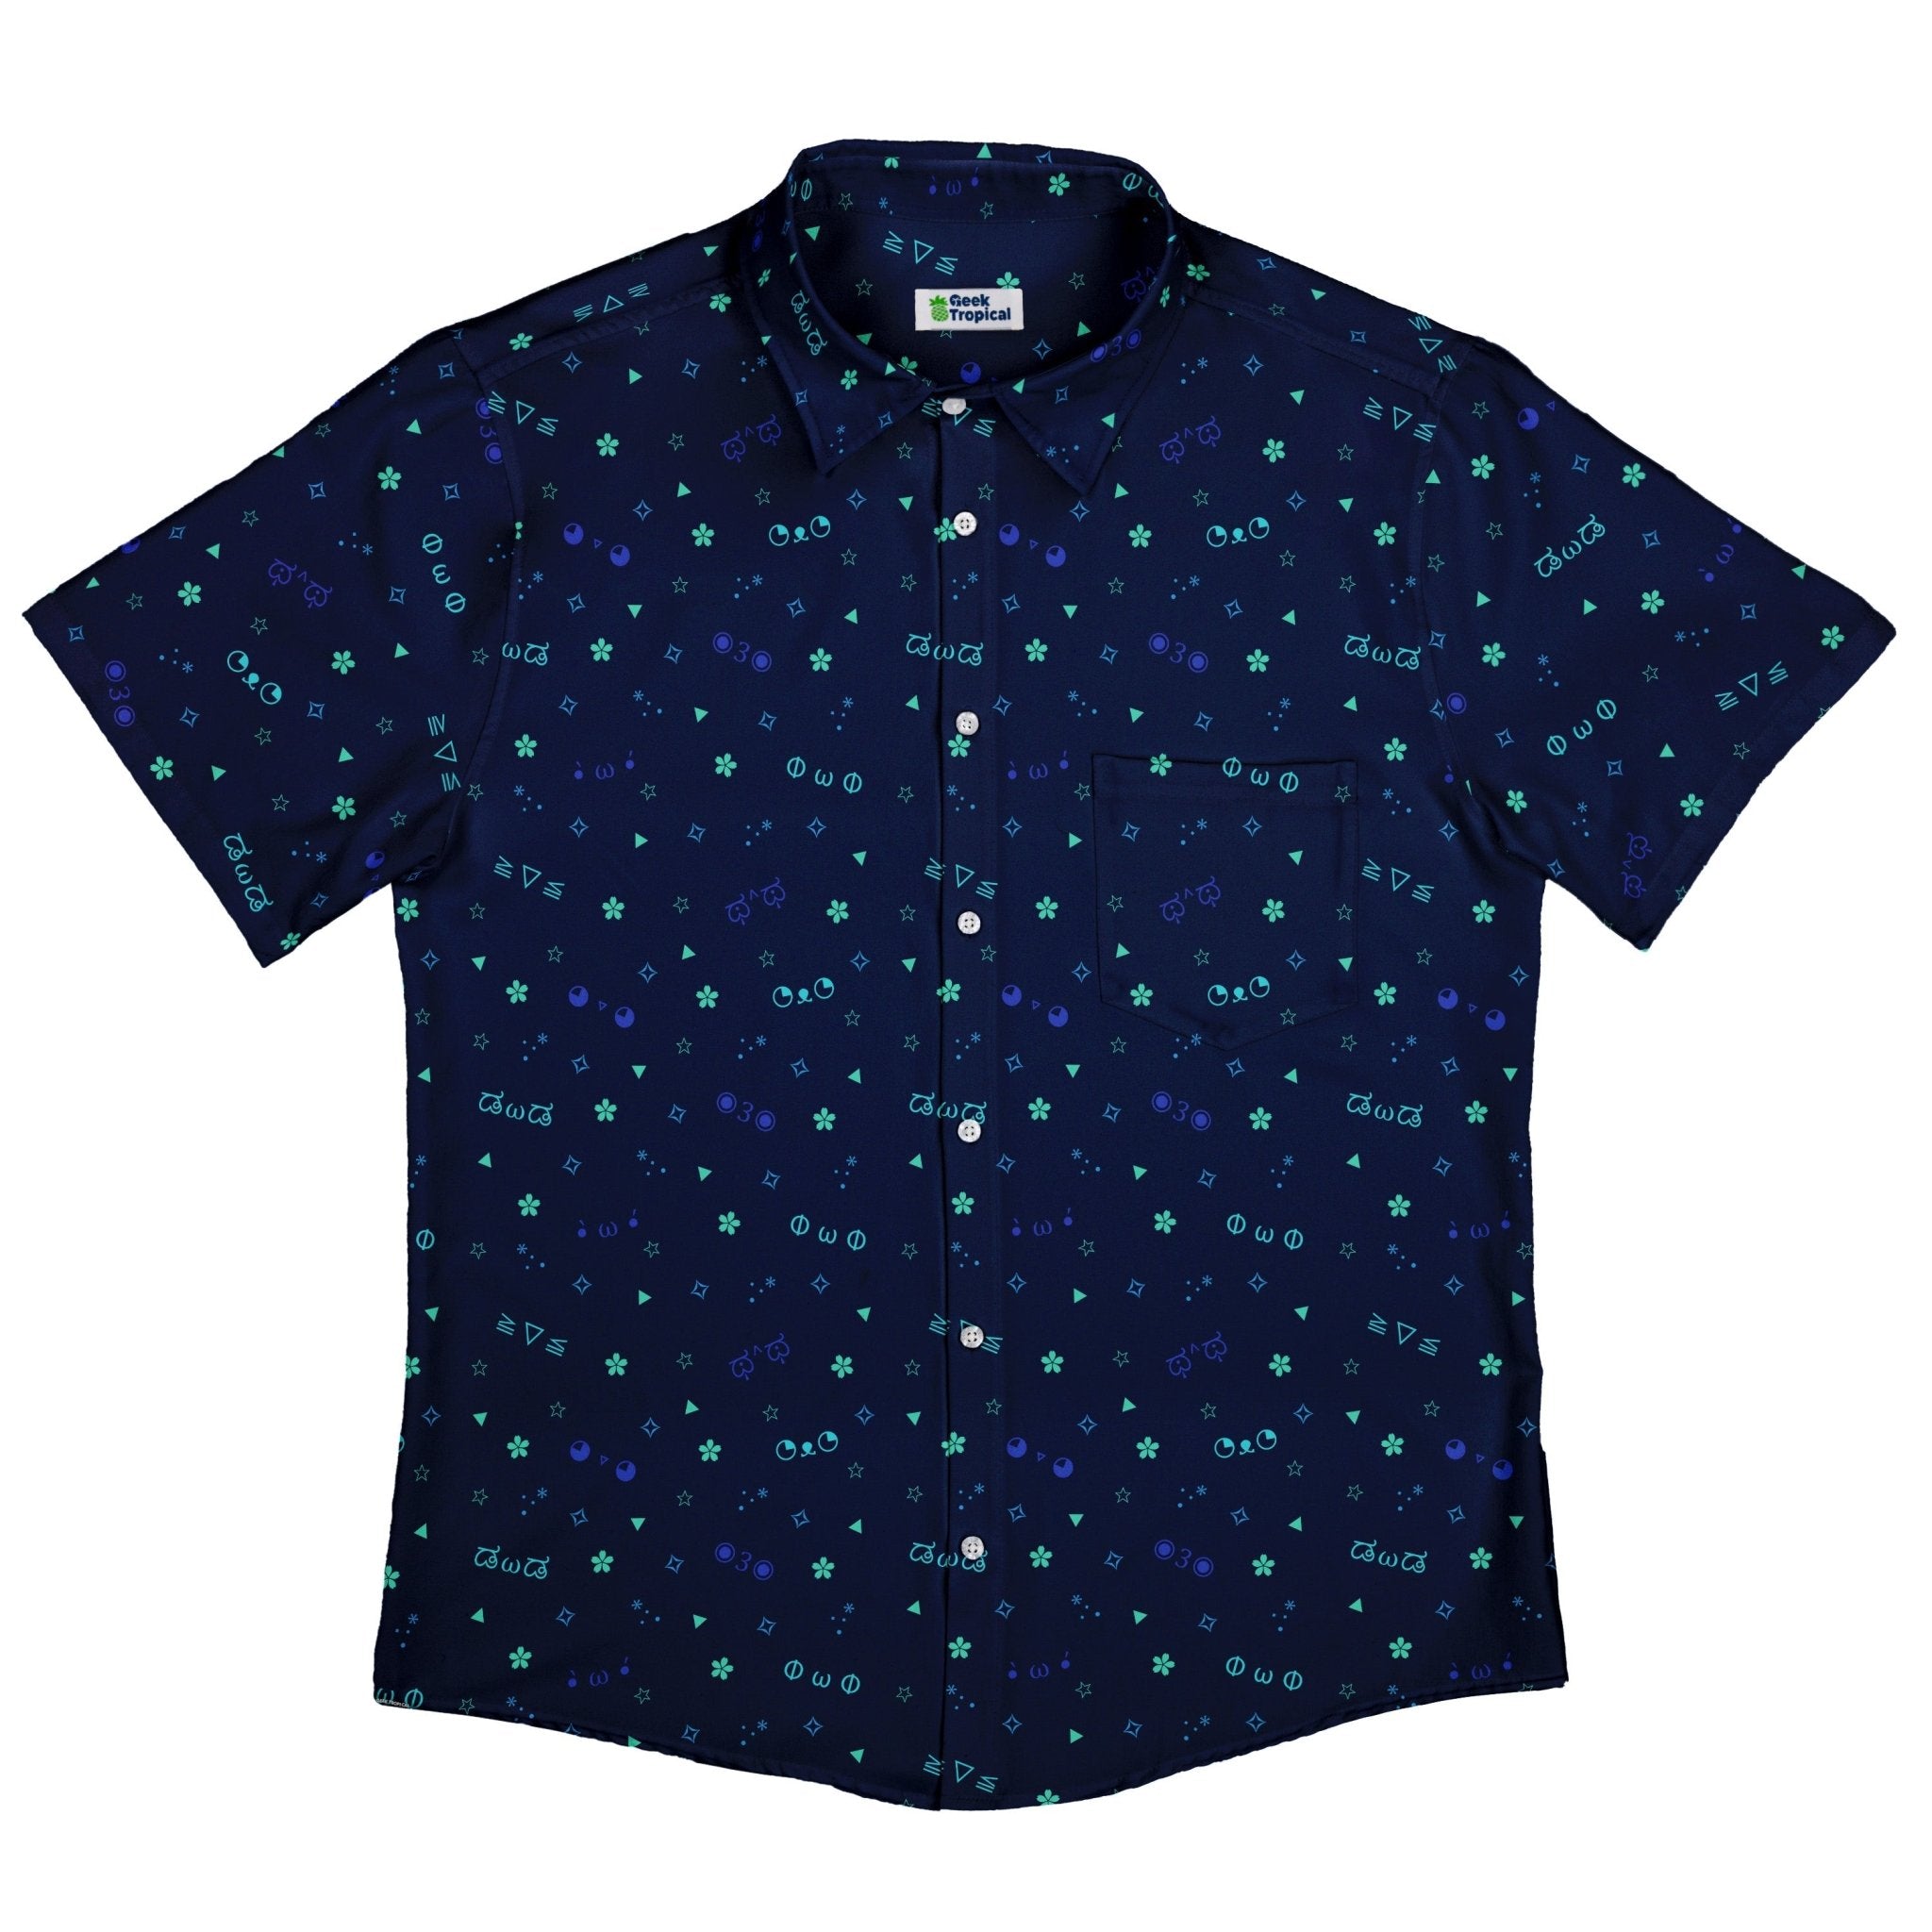 Kao Emojis Blue Button Up Shirt - adult sizing - Anime - Design by Ardi Tong